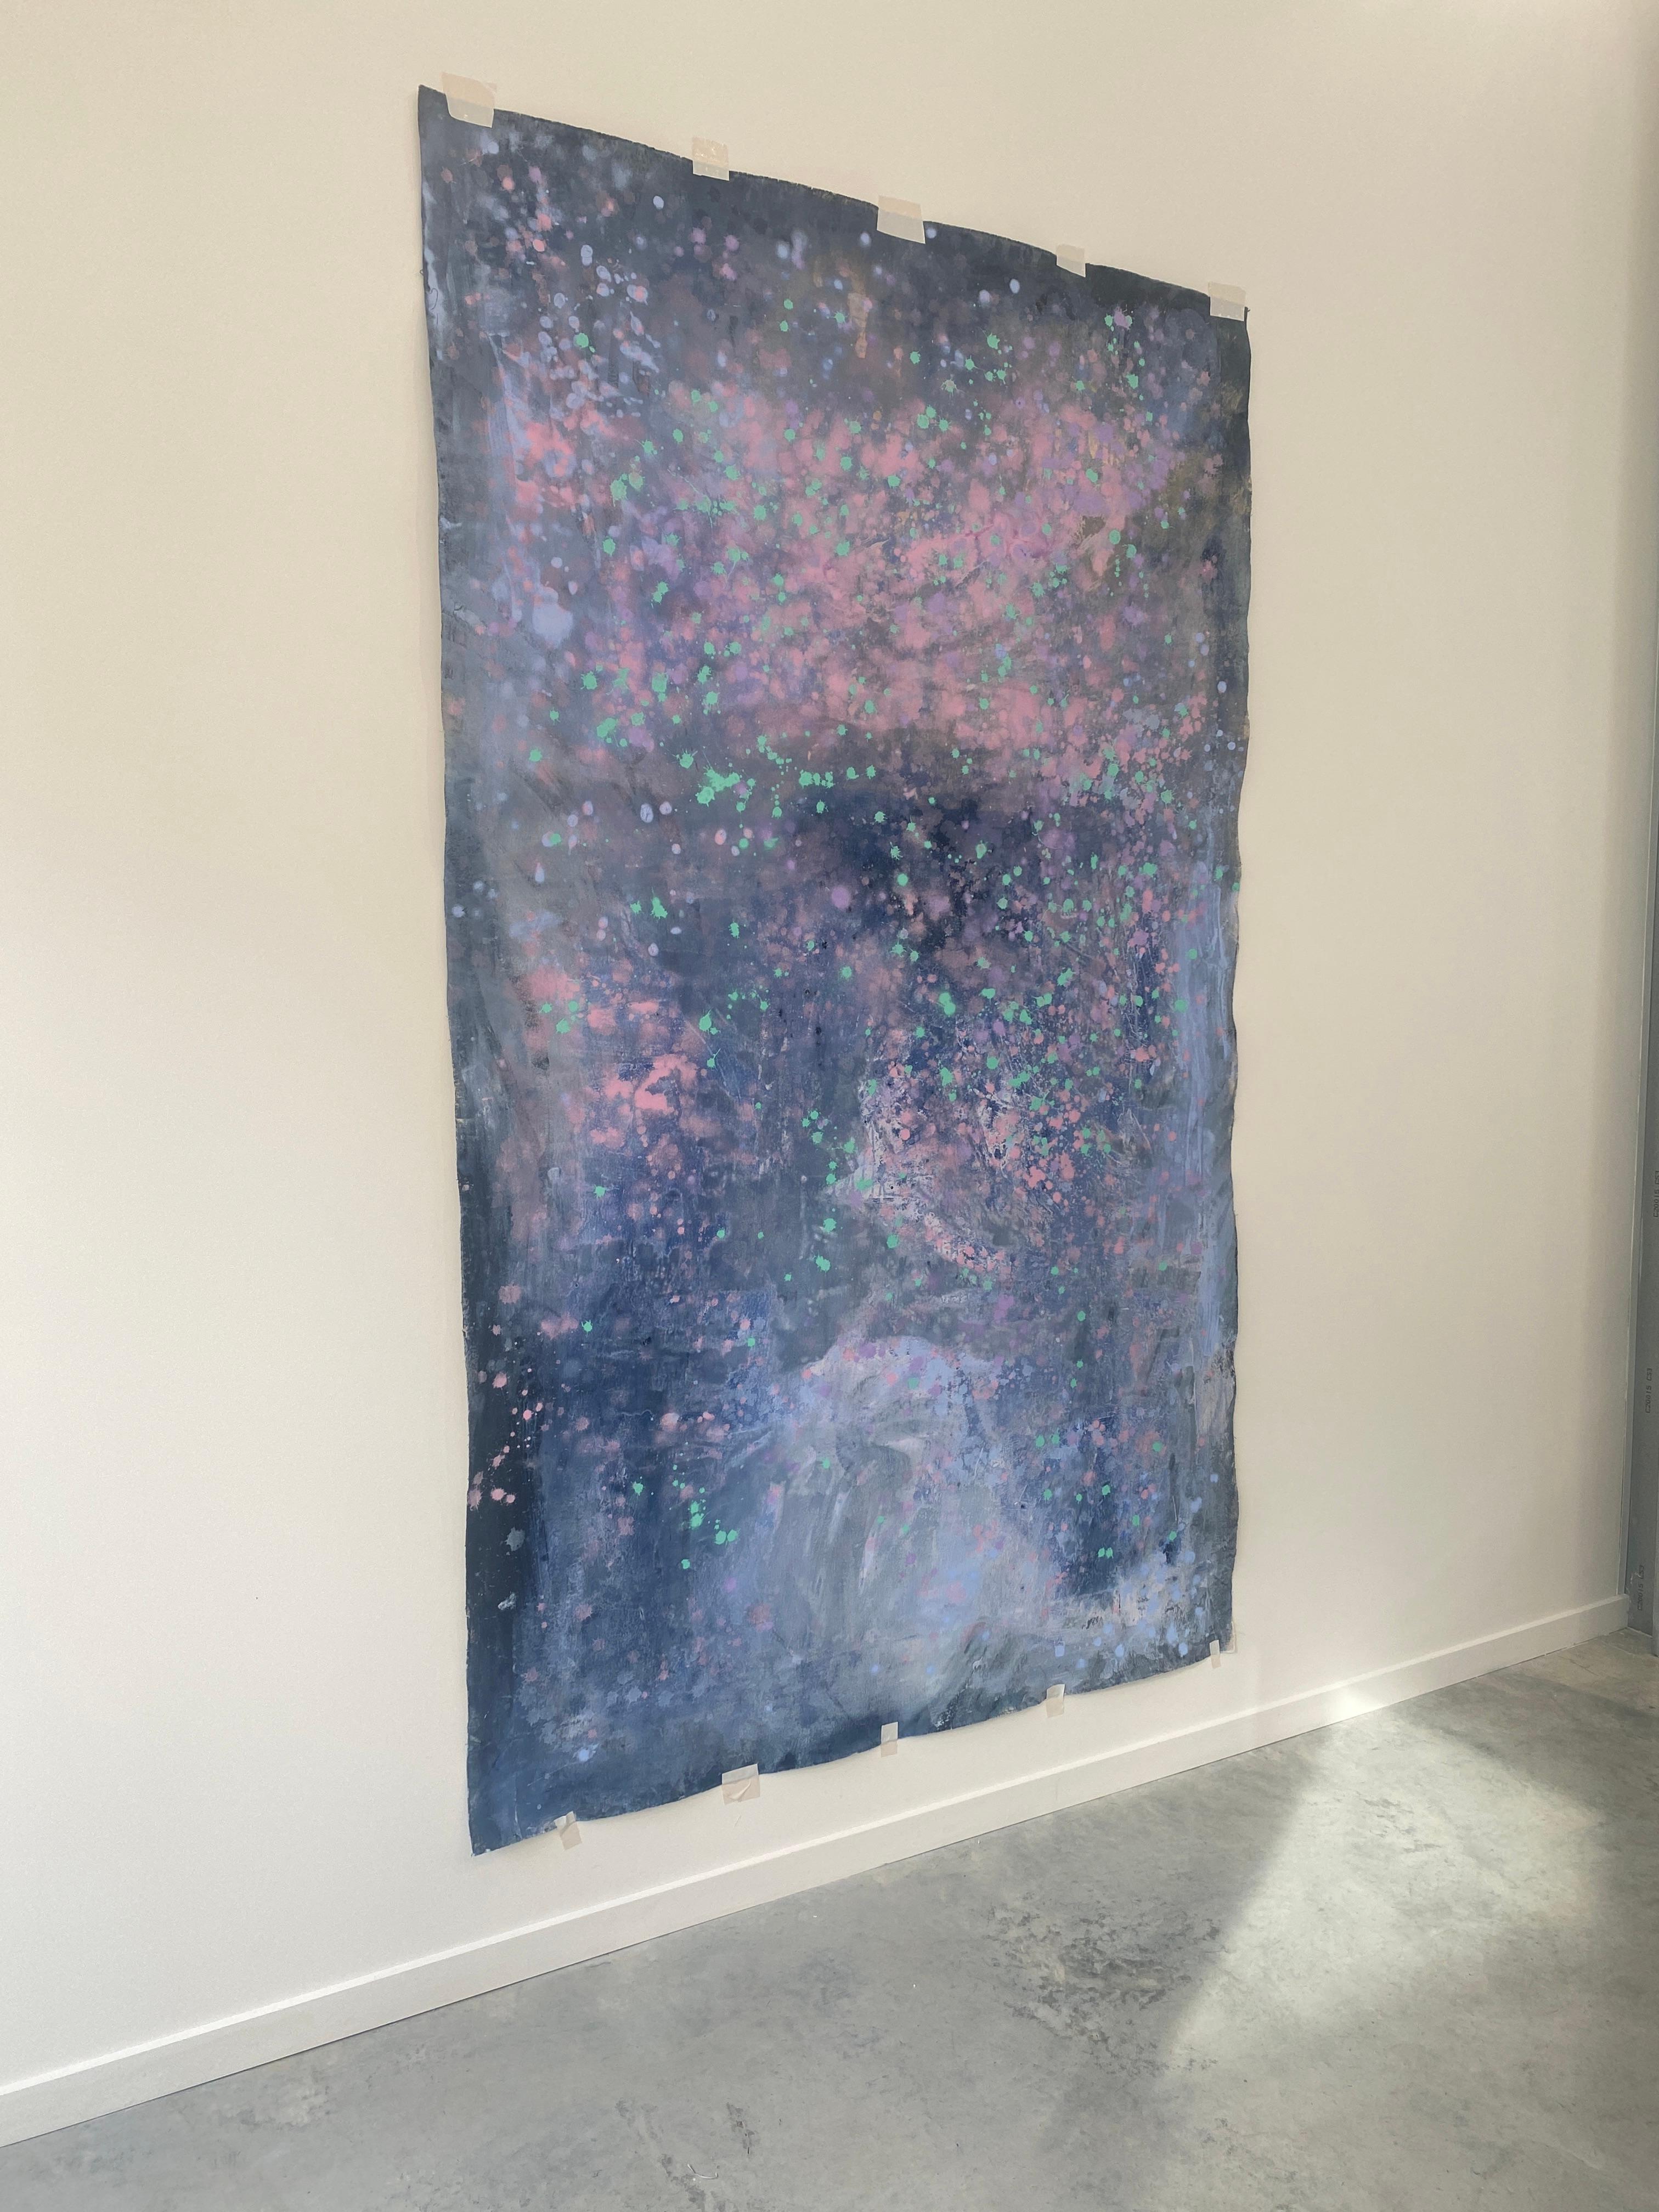 Milky Way large statement art abstract painting on canvas blue grey pink aqua For Sale 3